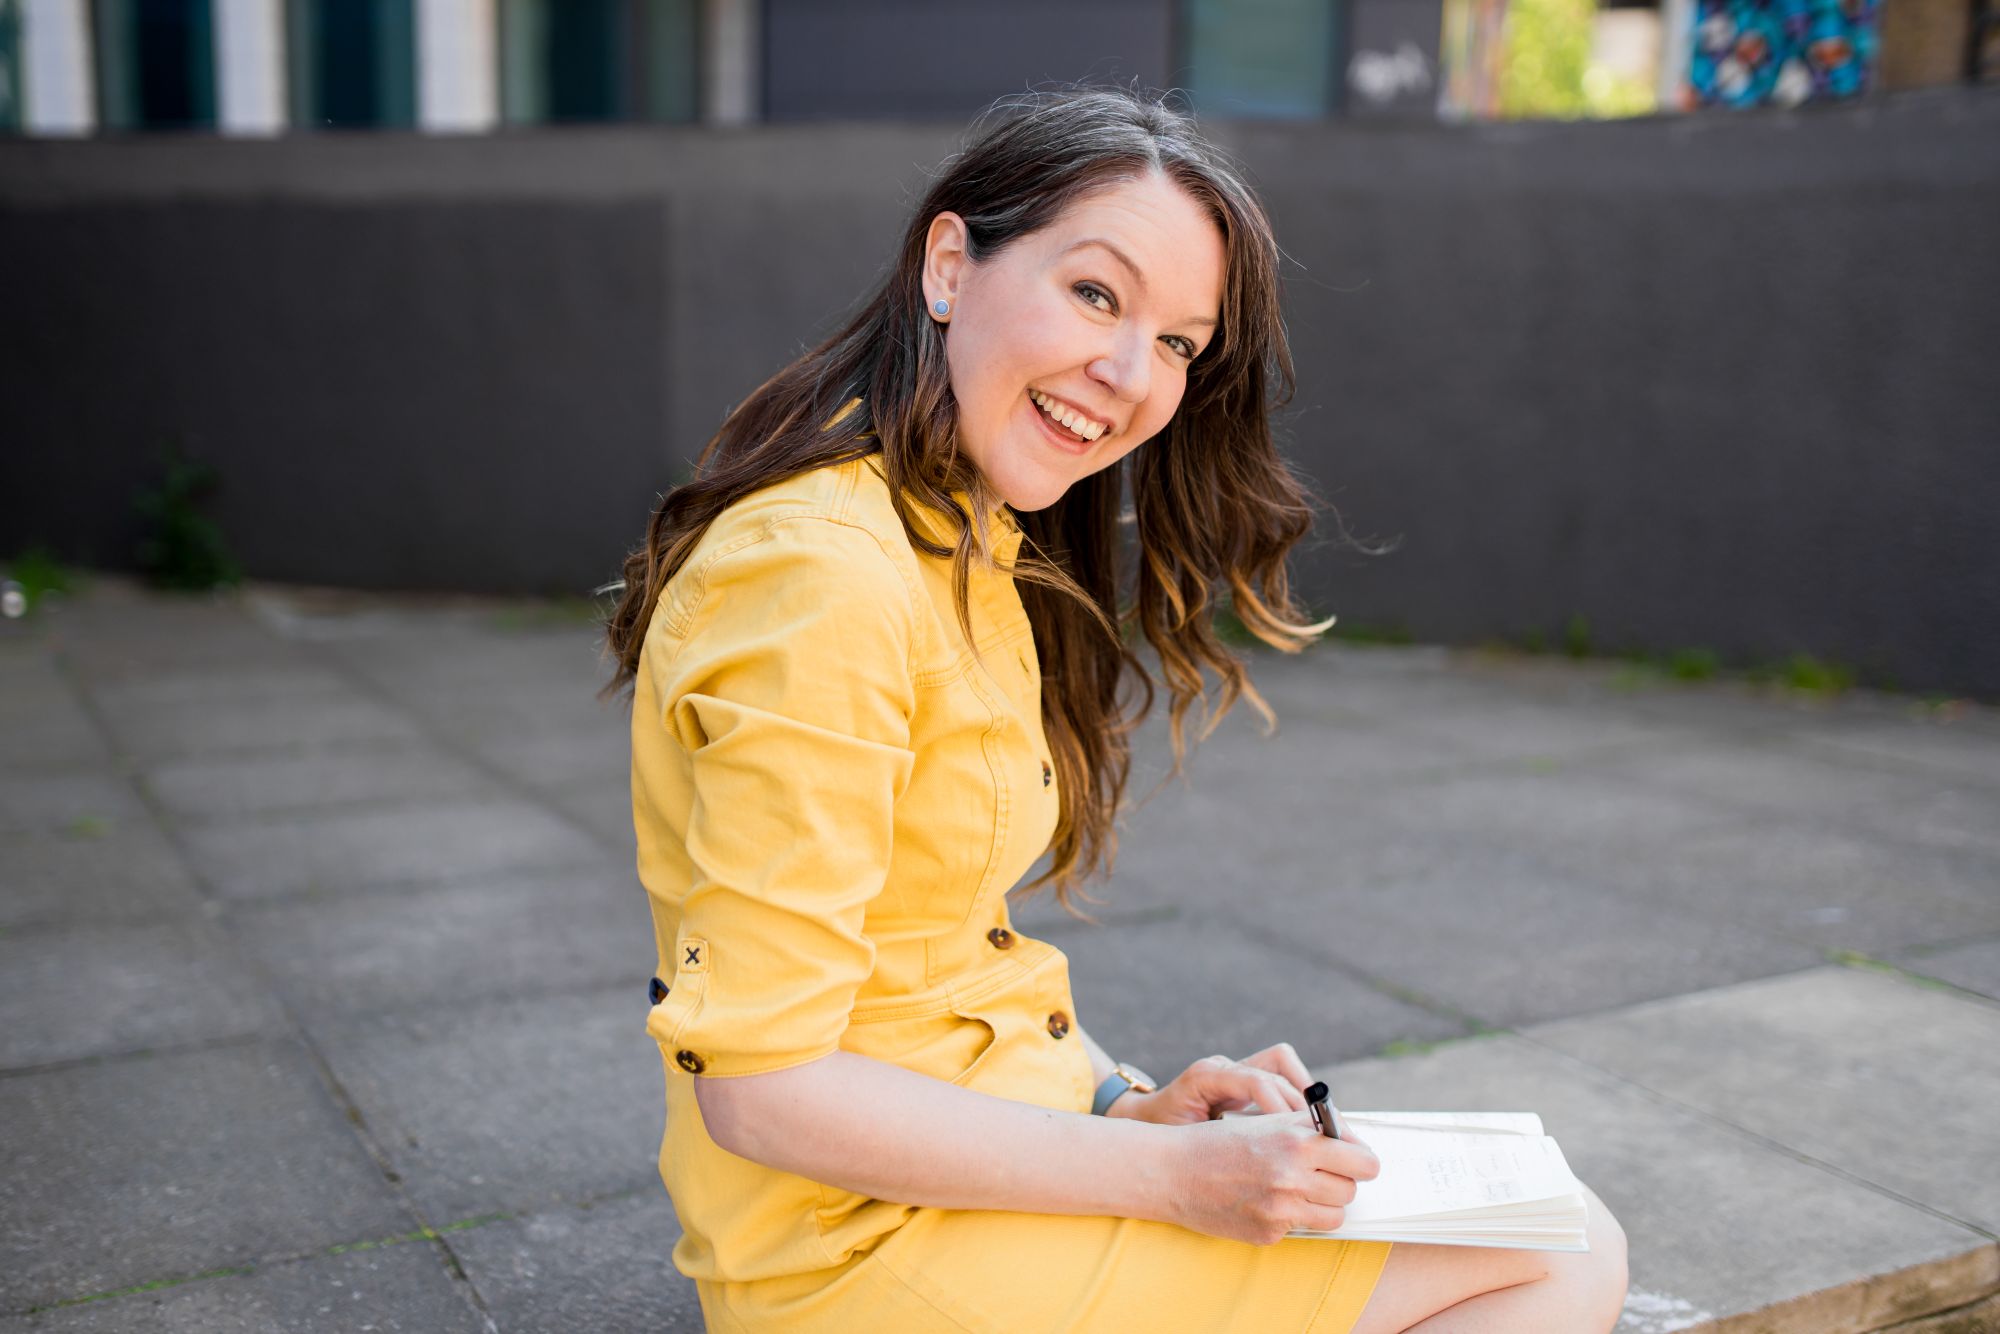 Brighton headshot photographer Lauren Psyk sitting down in the street writing with a pen and notebook